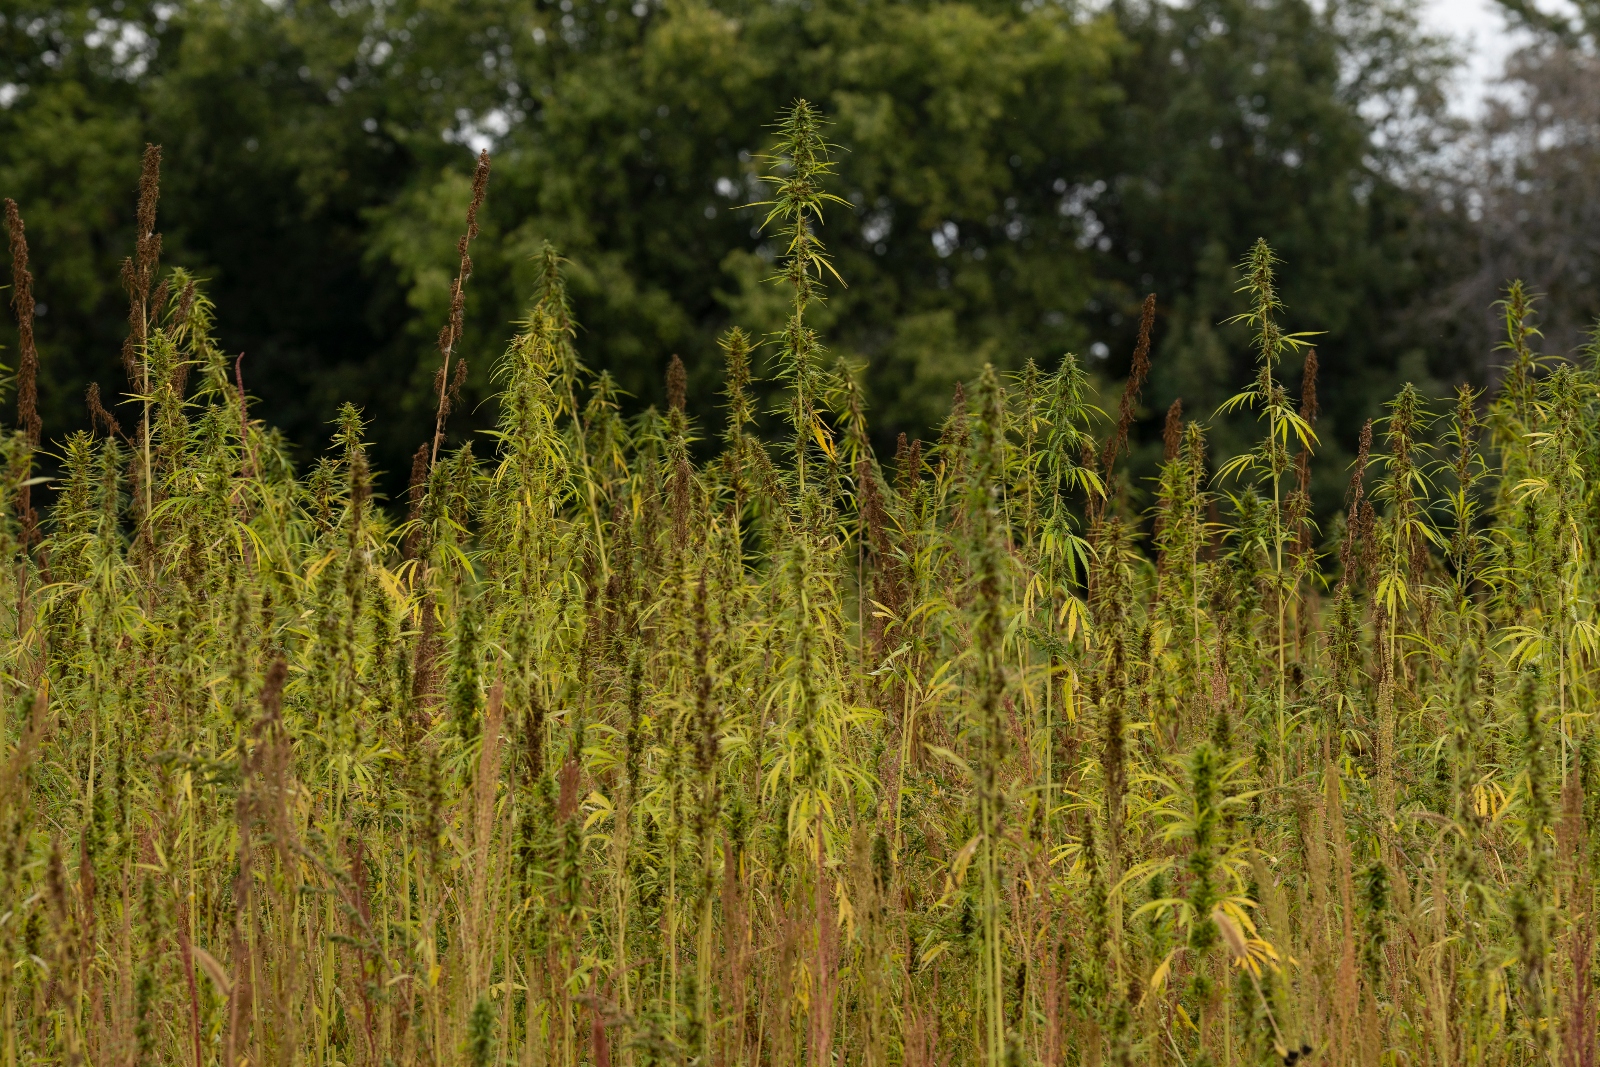 The Lower Sioux in Minnesota need homes — so they are building them from hemp